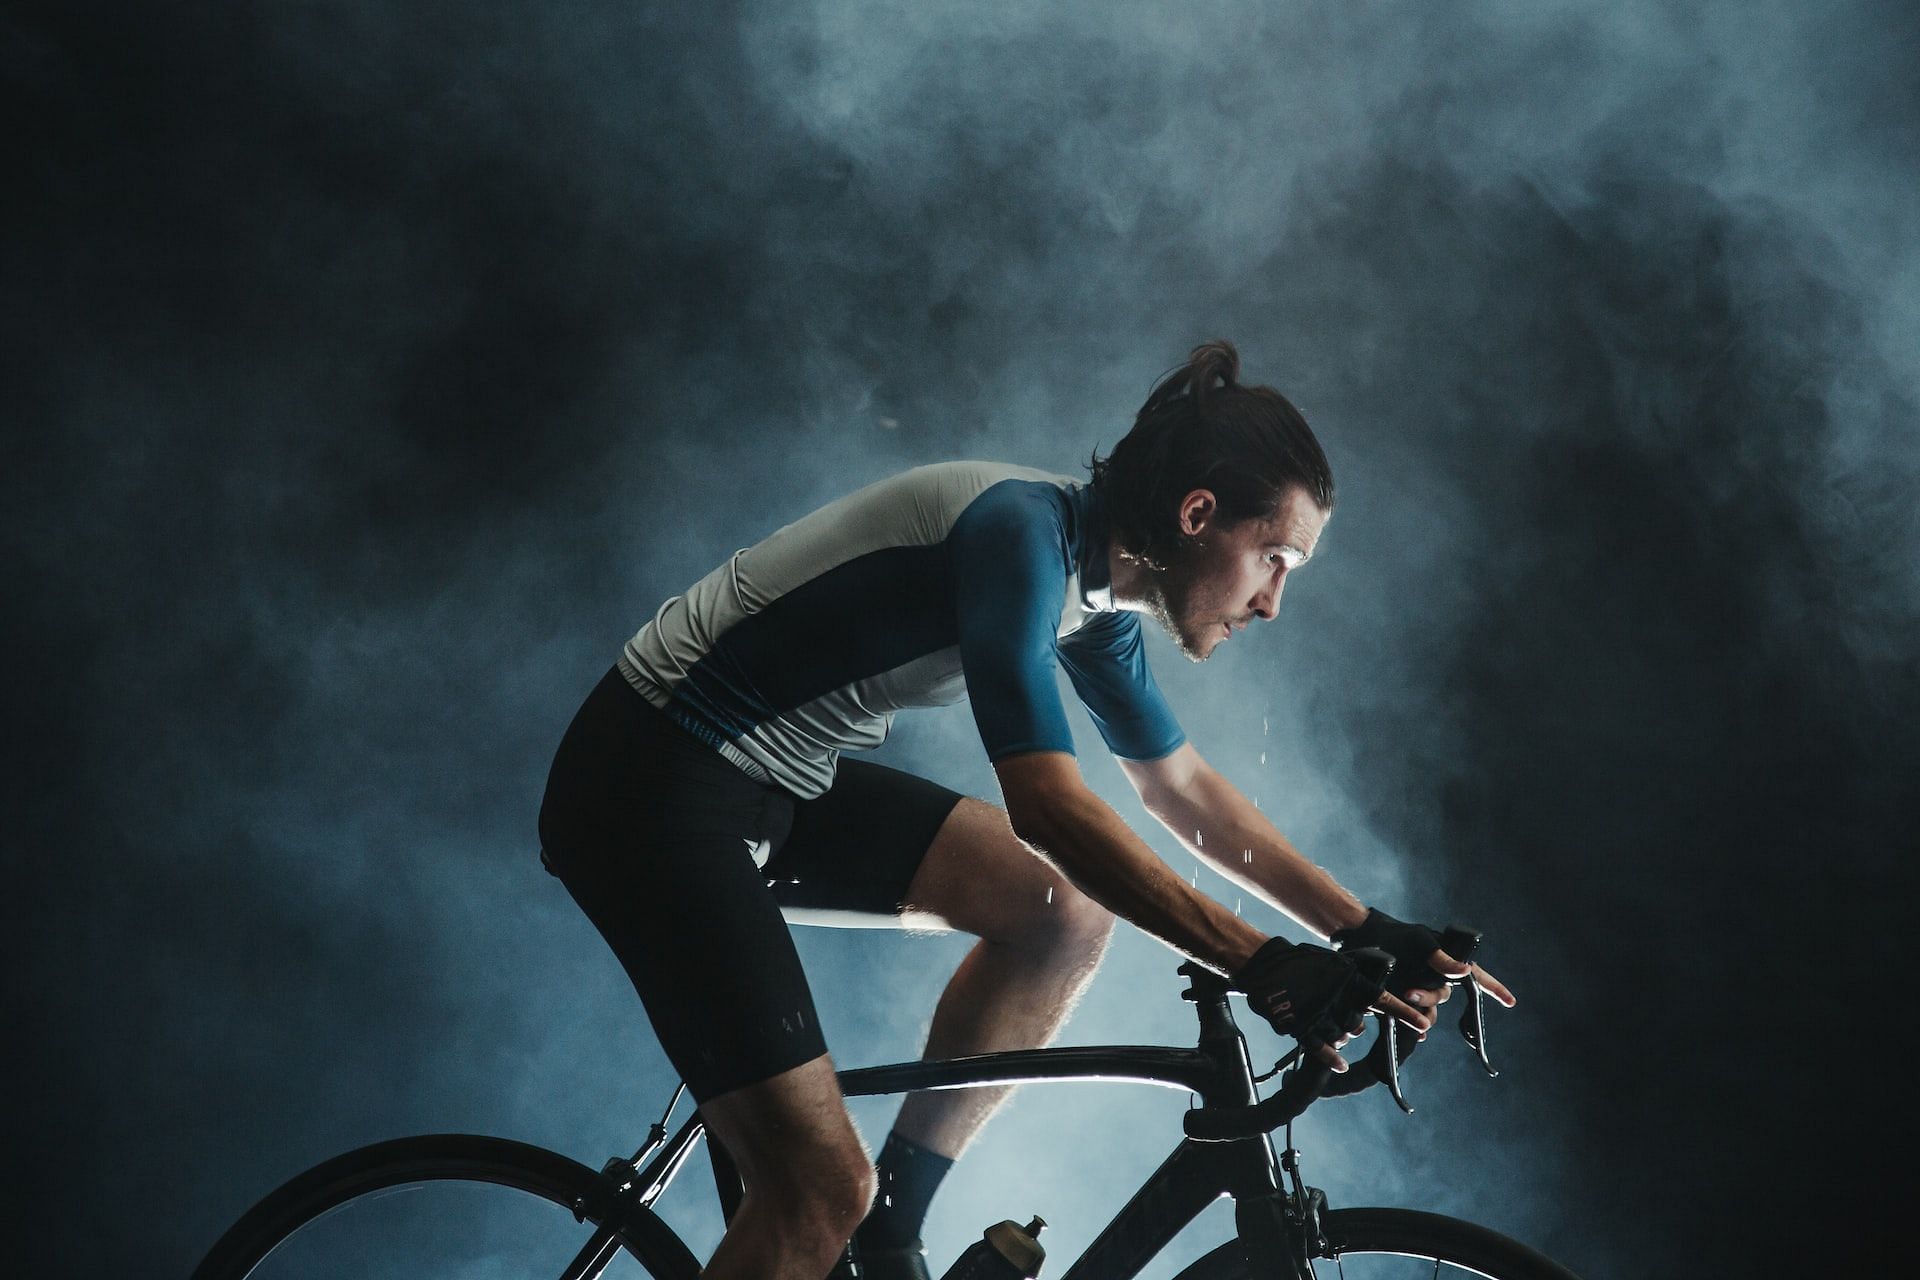 How to build endurance? (Photo by Munbaik Cycling Clothing on Unsplash)